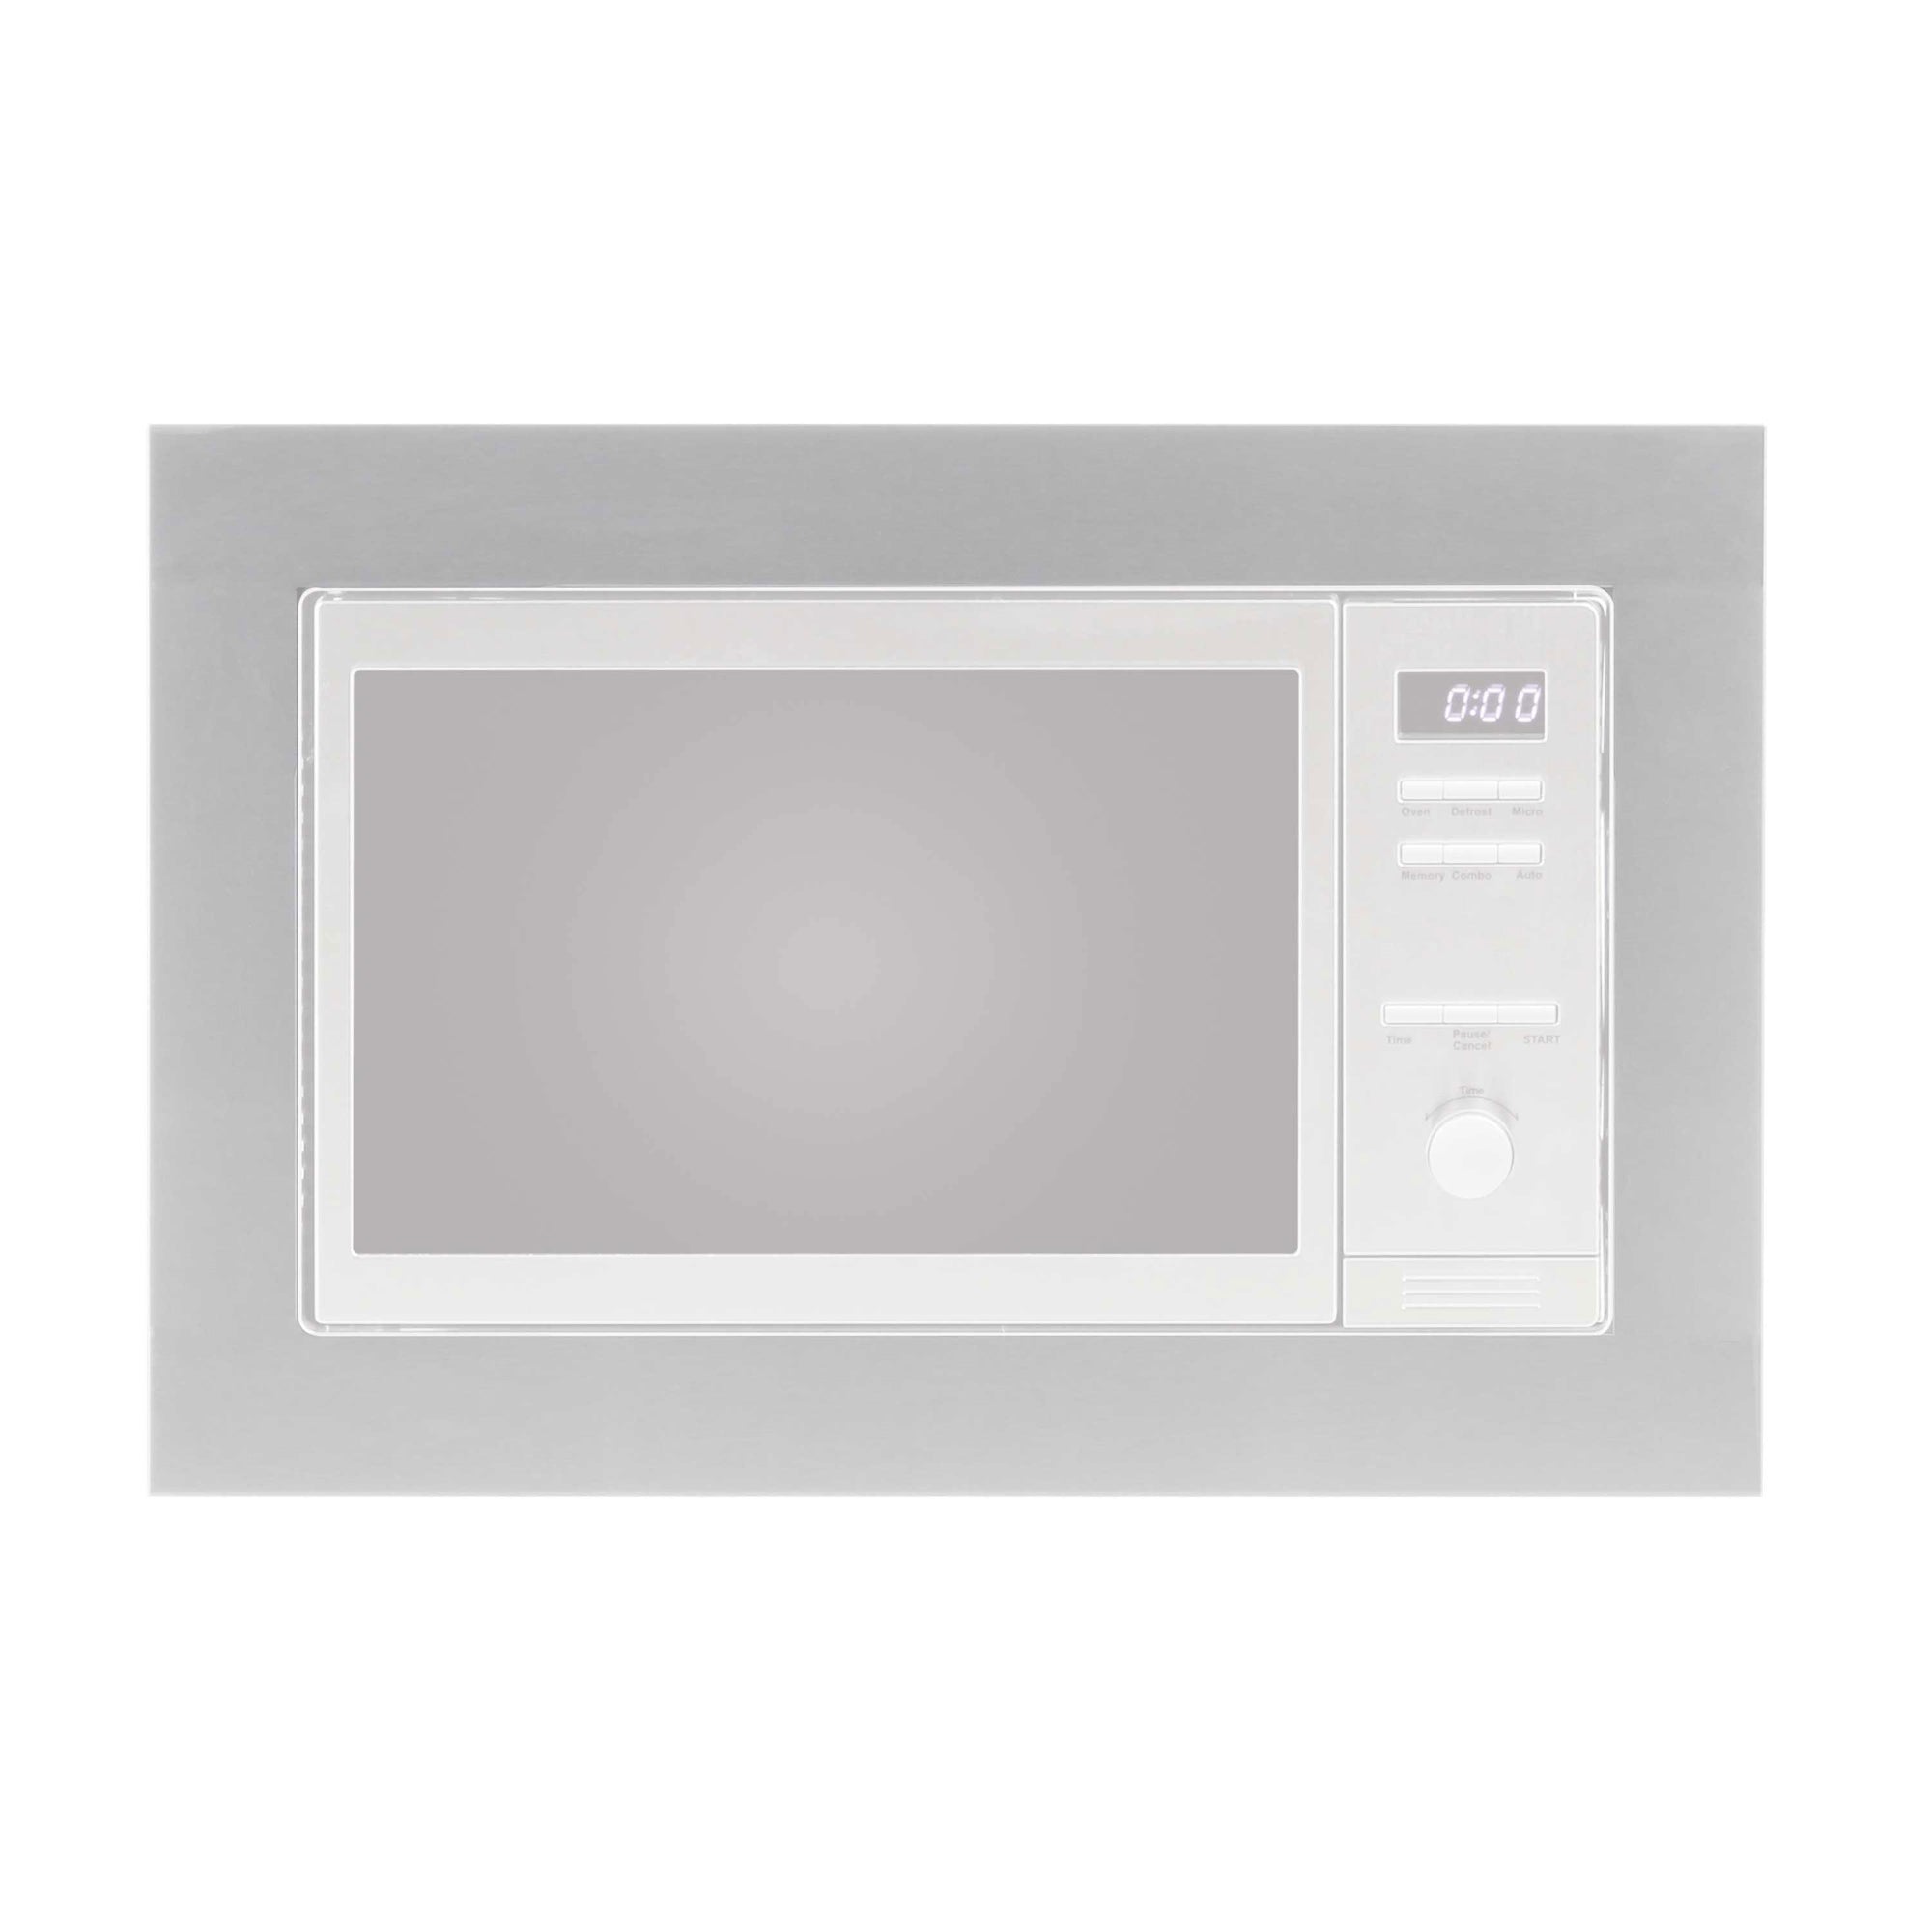 Pinnacle TRM-800 Trim Kit For Combo Microwave-Oven